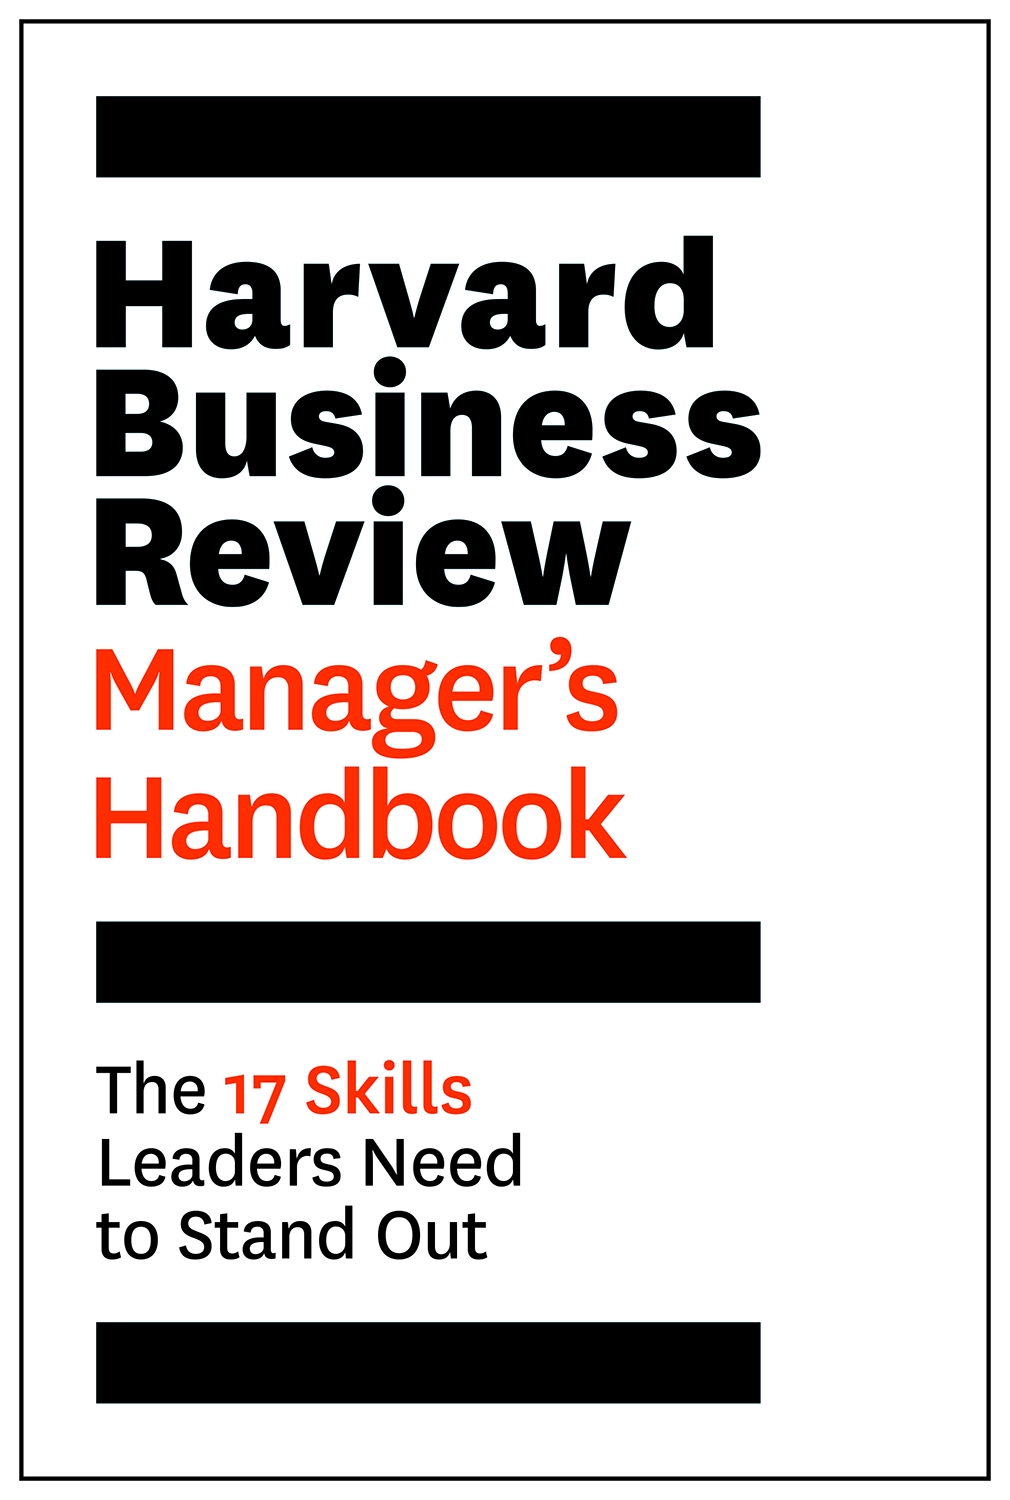 case study harvard business review